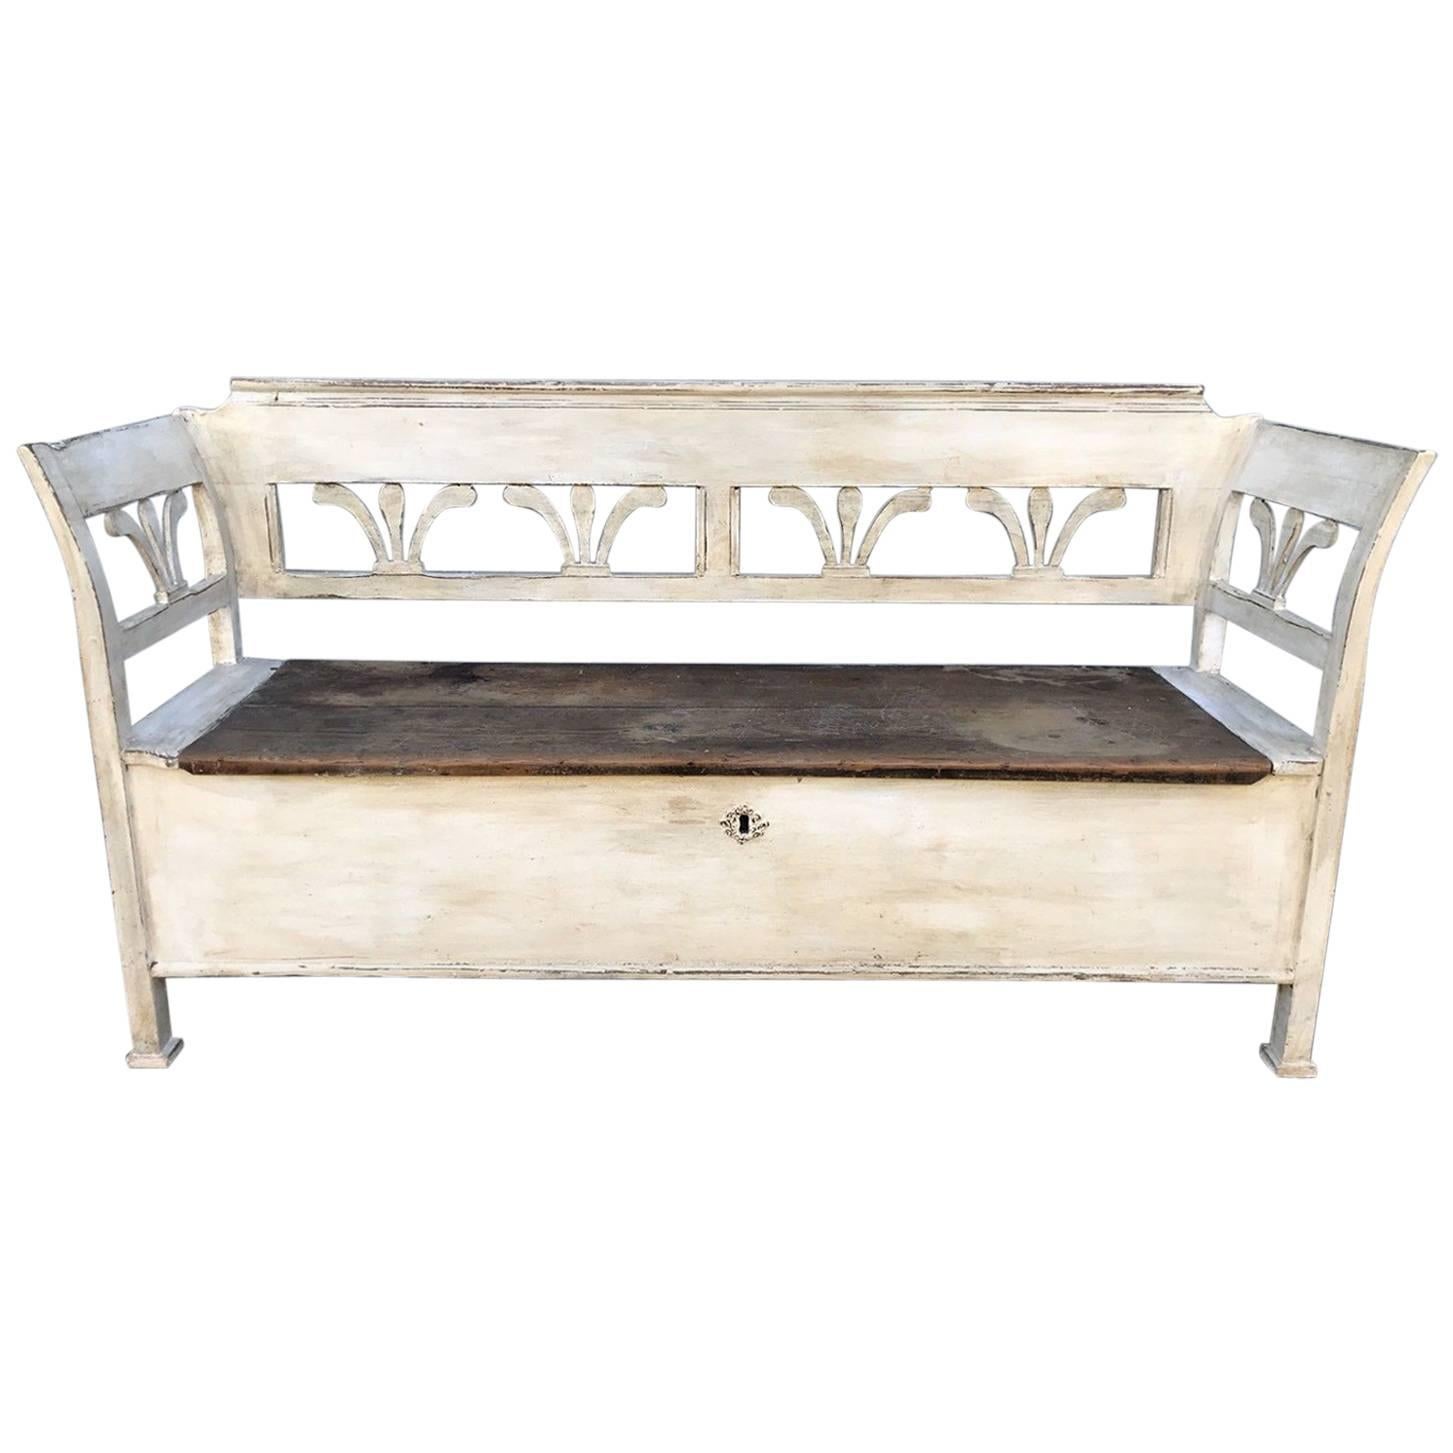 Beautiful Swedish Painted Bench/Settle, Storage Box, Painted For Sale